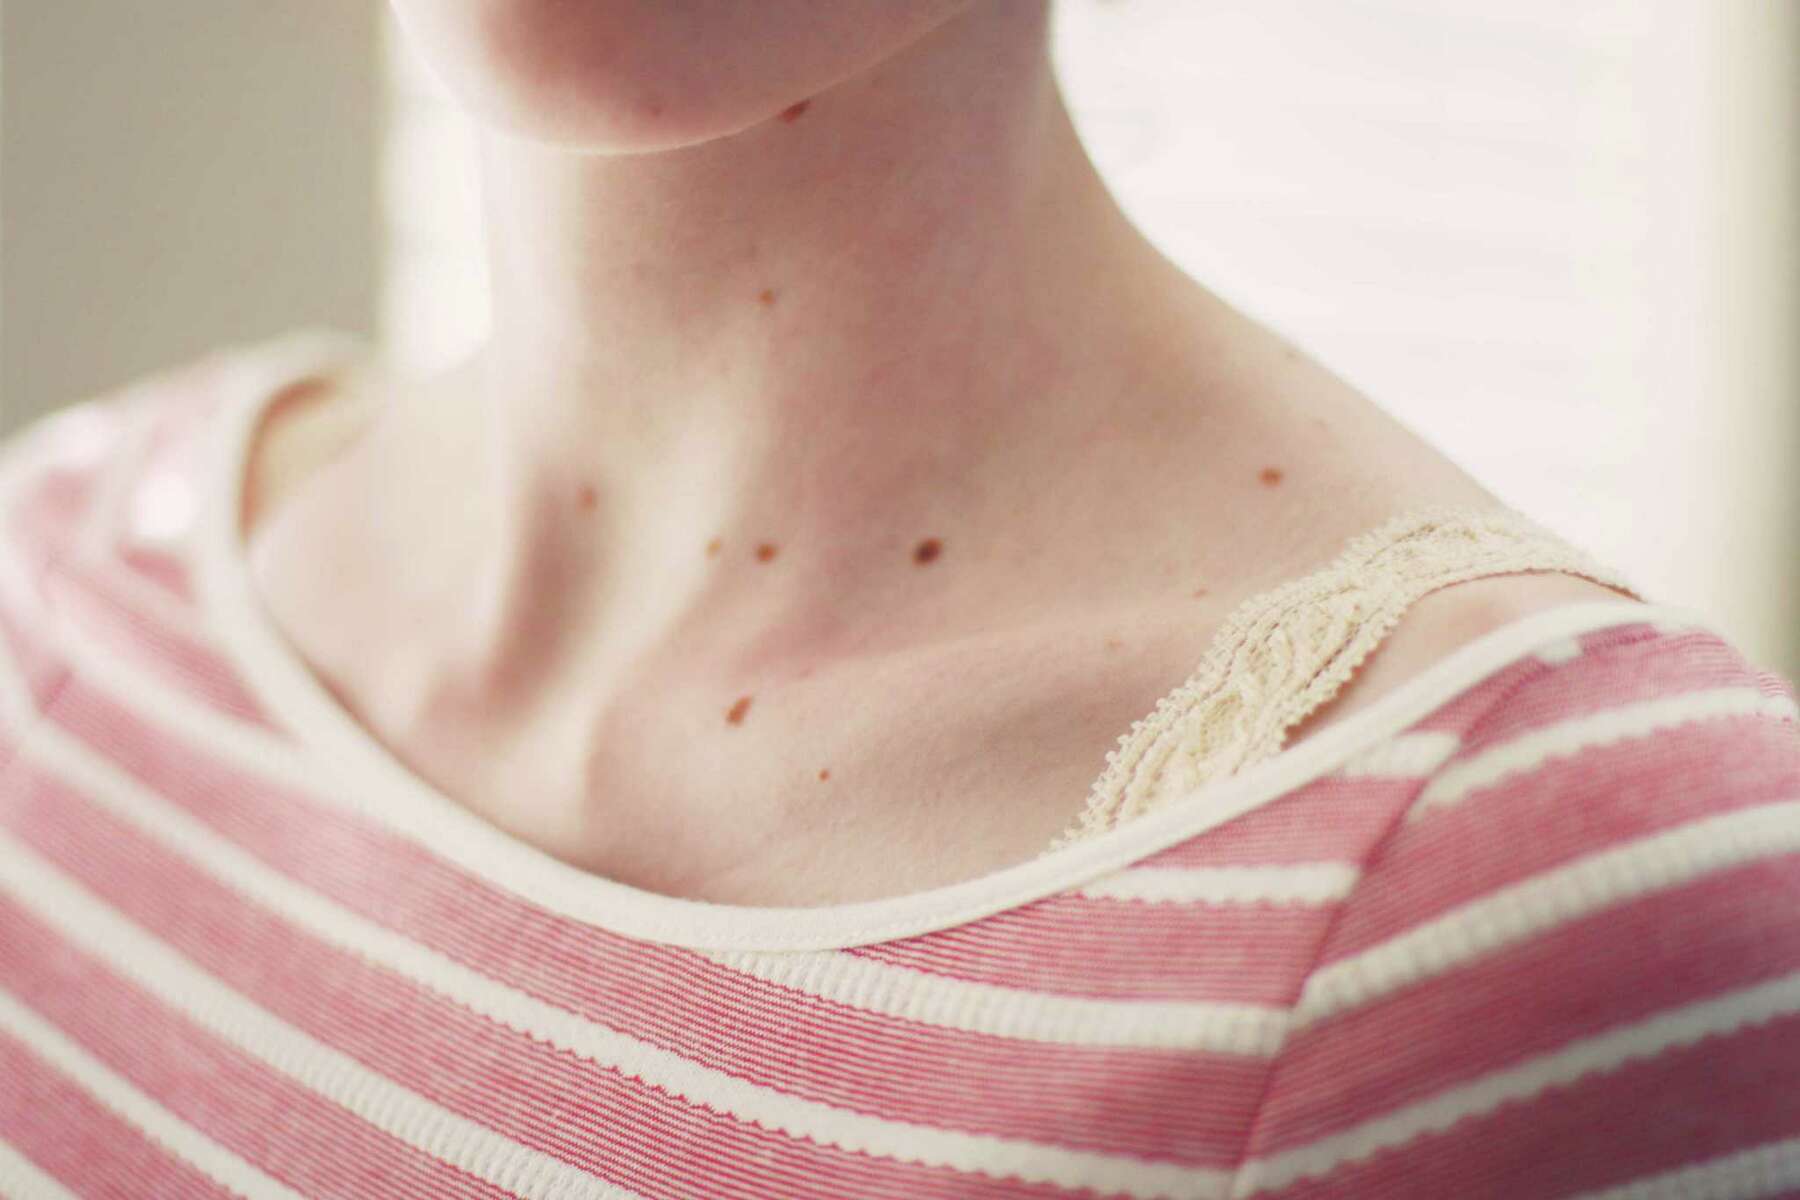 13 Photos Of Skin Spots And What Caused Them